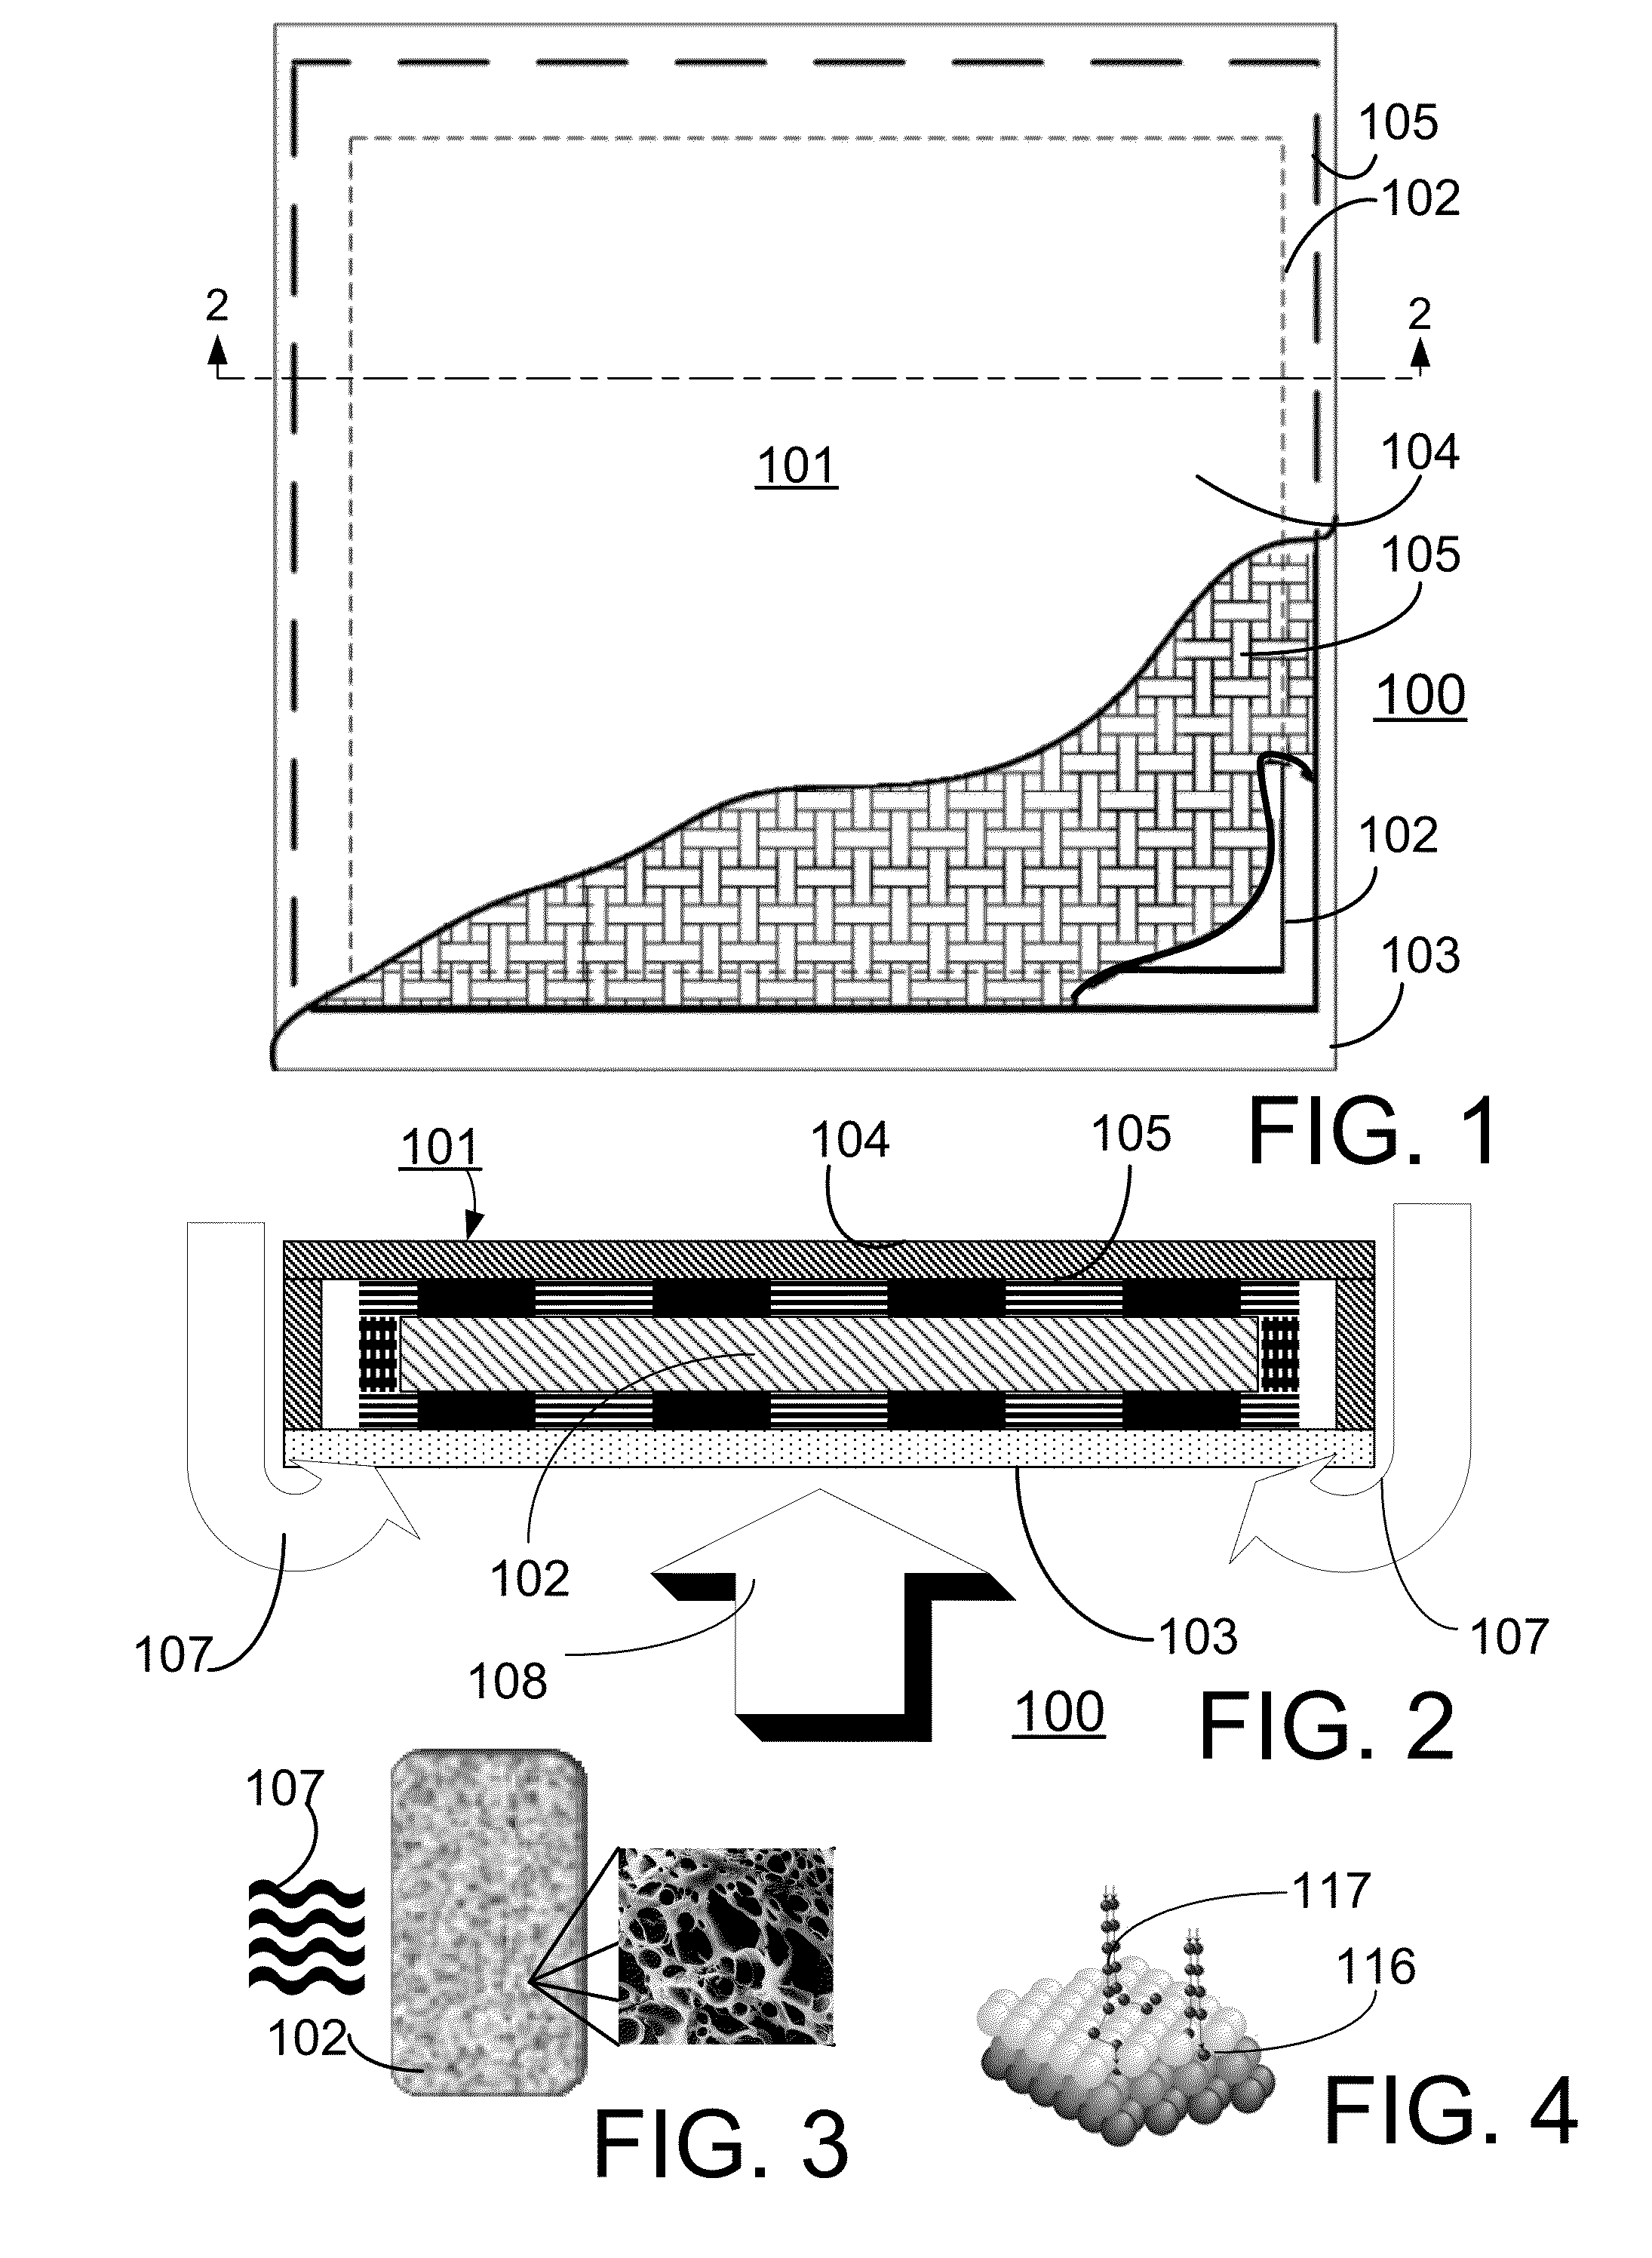 Biodegradable odor removing article and system